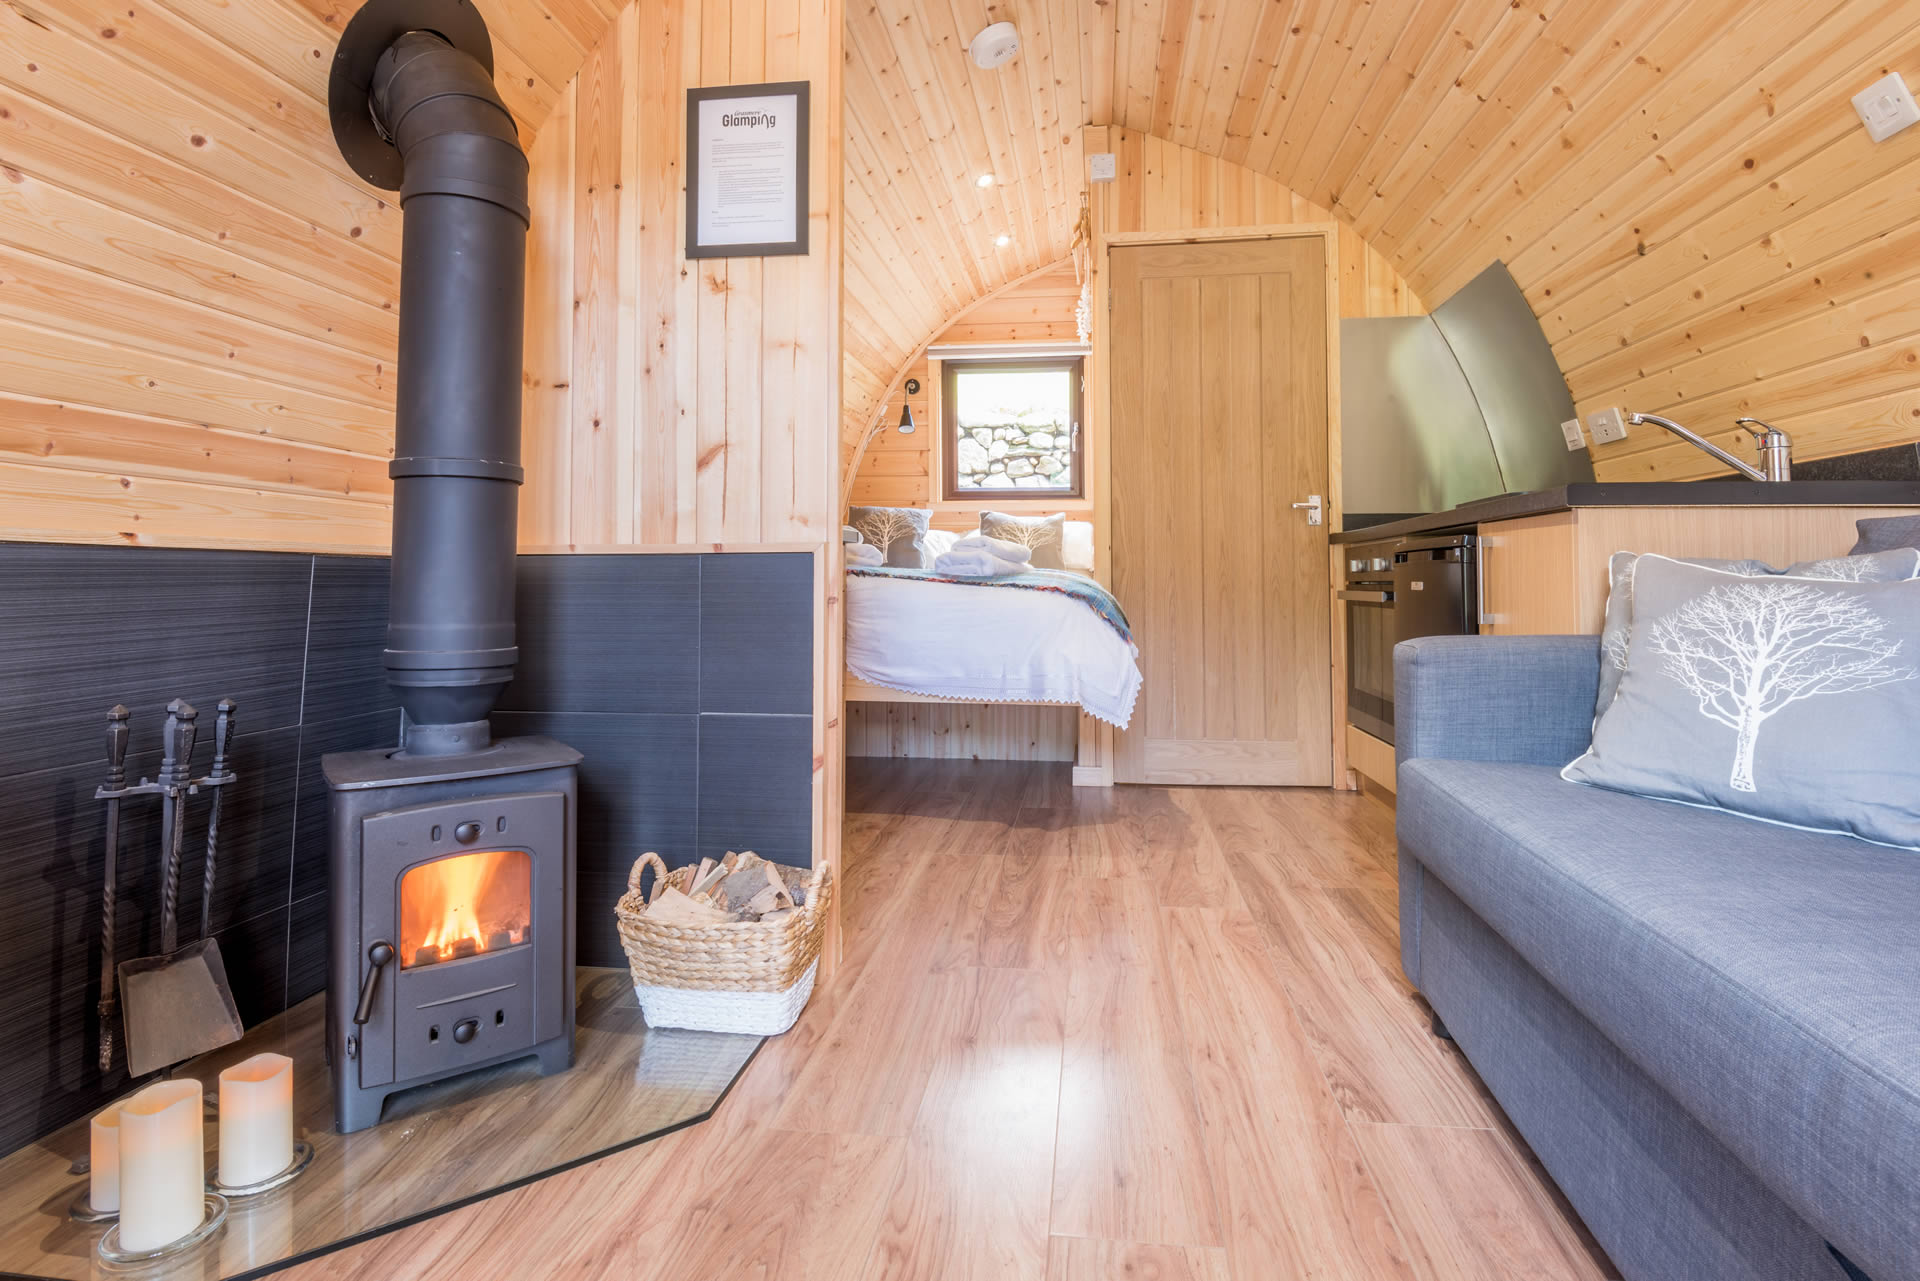 Interior of Grasmere luxury glamping pod with wood burning stove and wifi